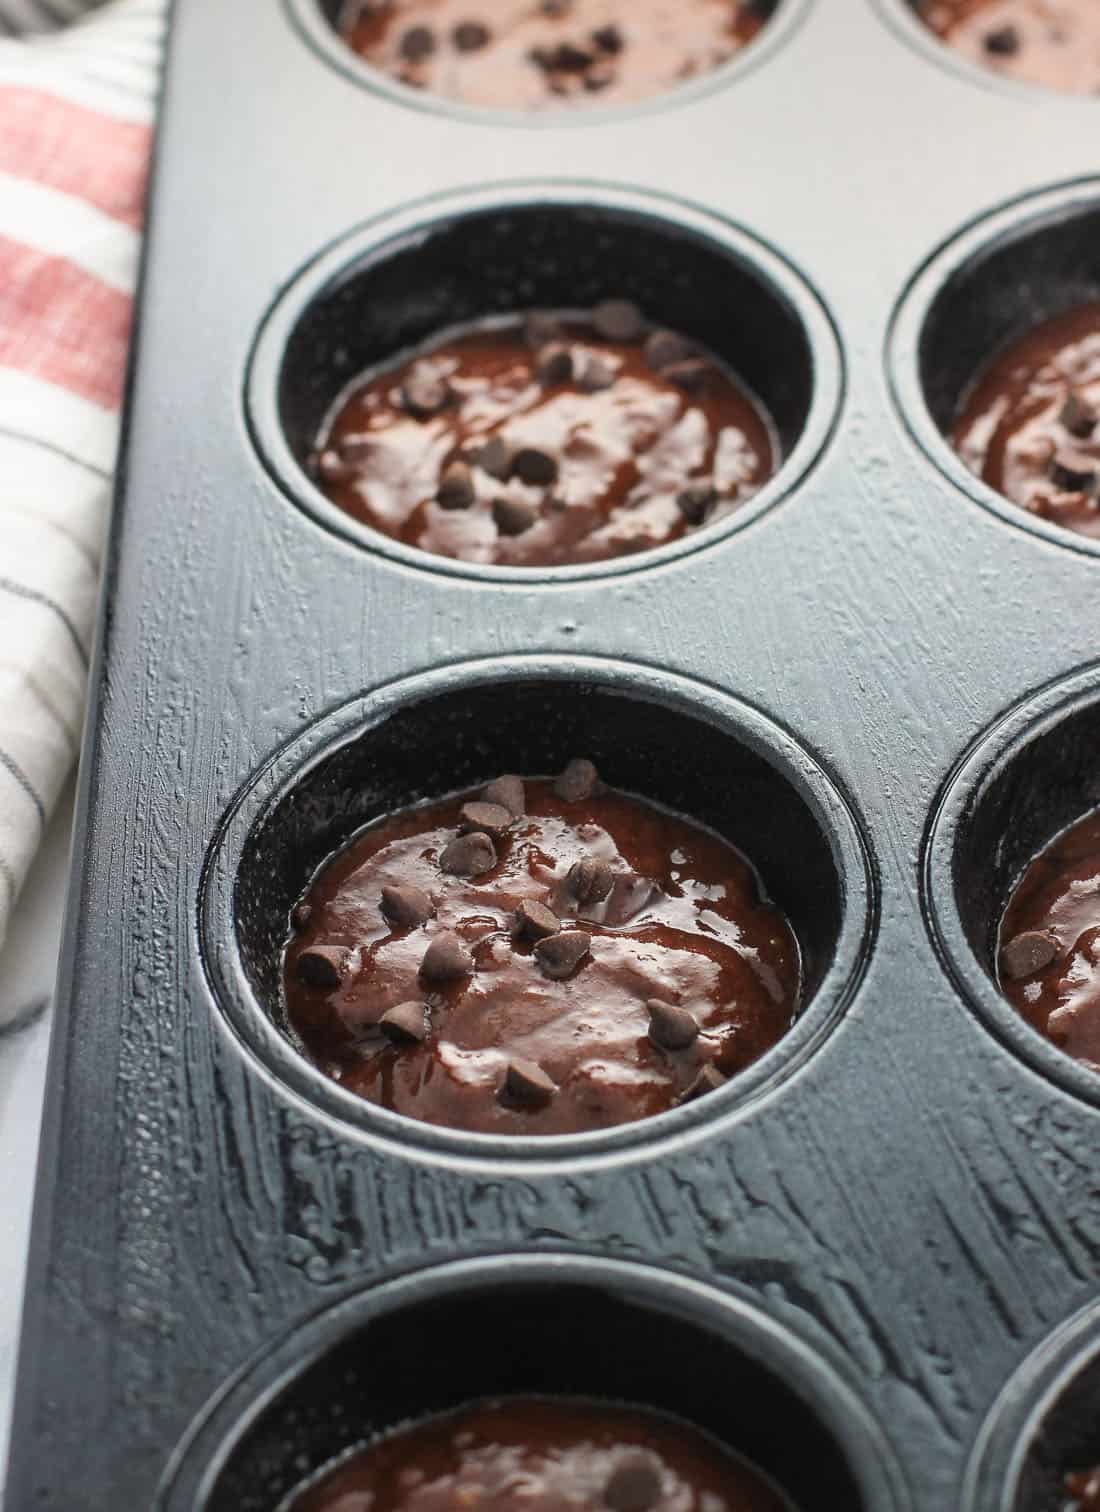 Muffin batter topped with mini chocolate chips portioned out into a regular-sized muffin tin